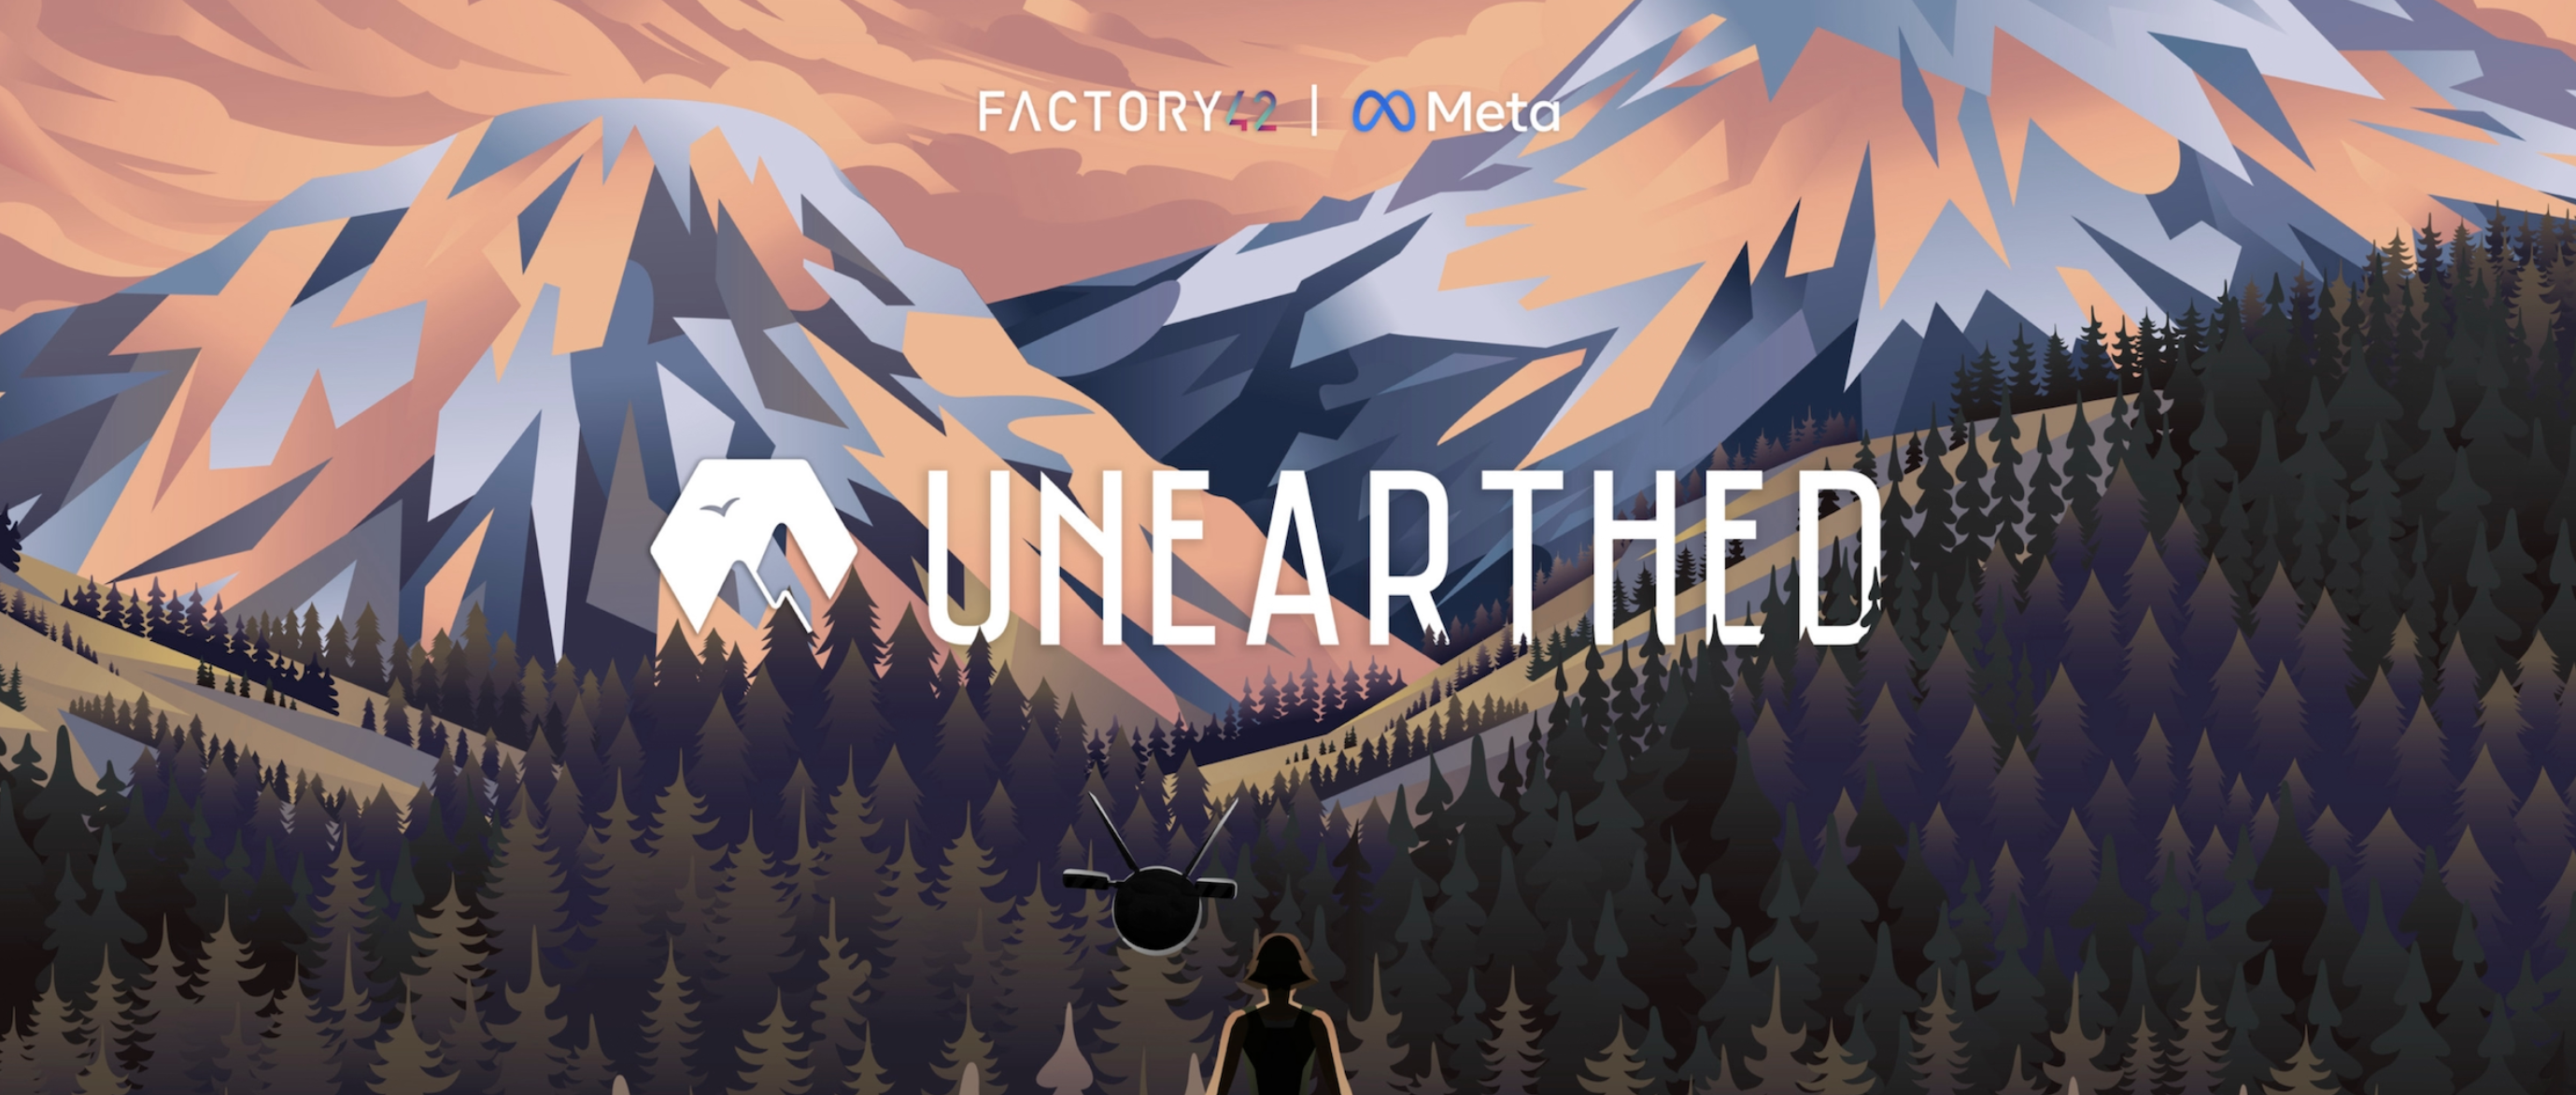 Unearthed - Factory 42/Meta